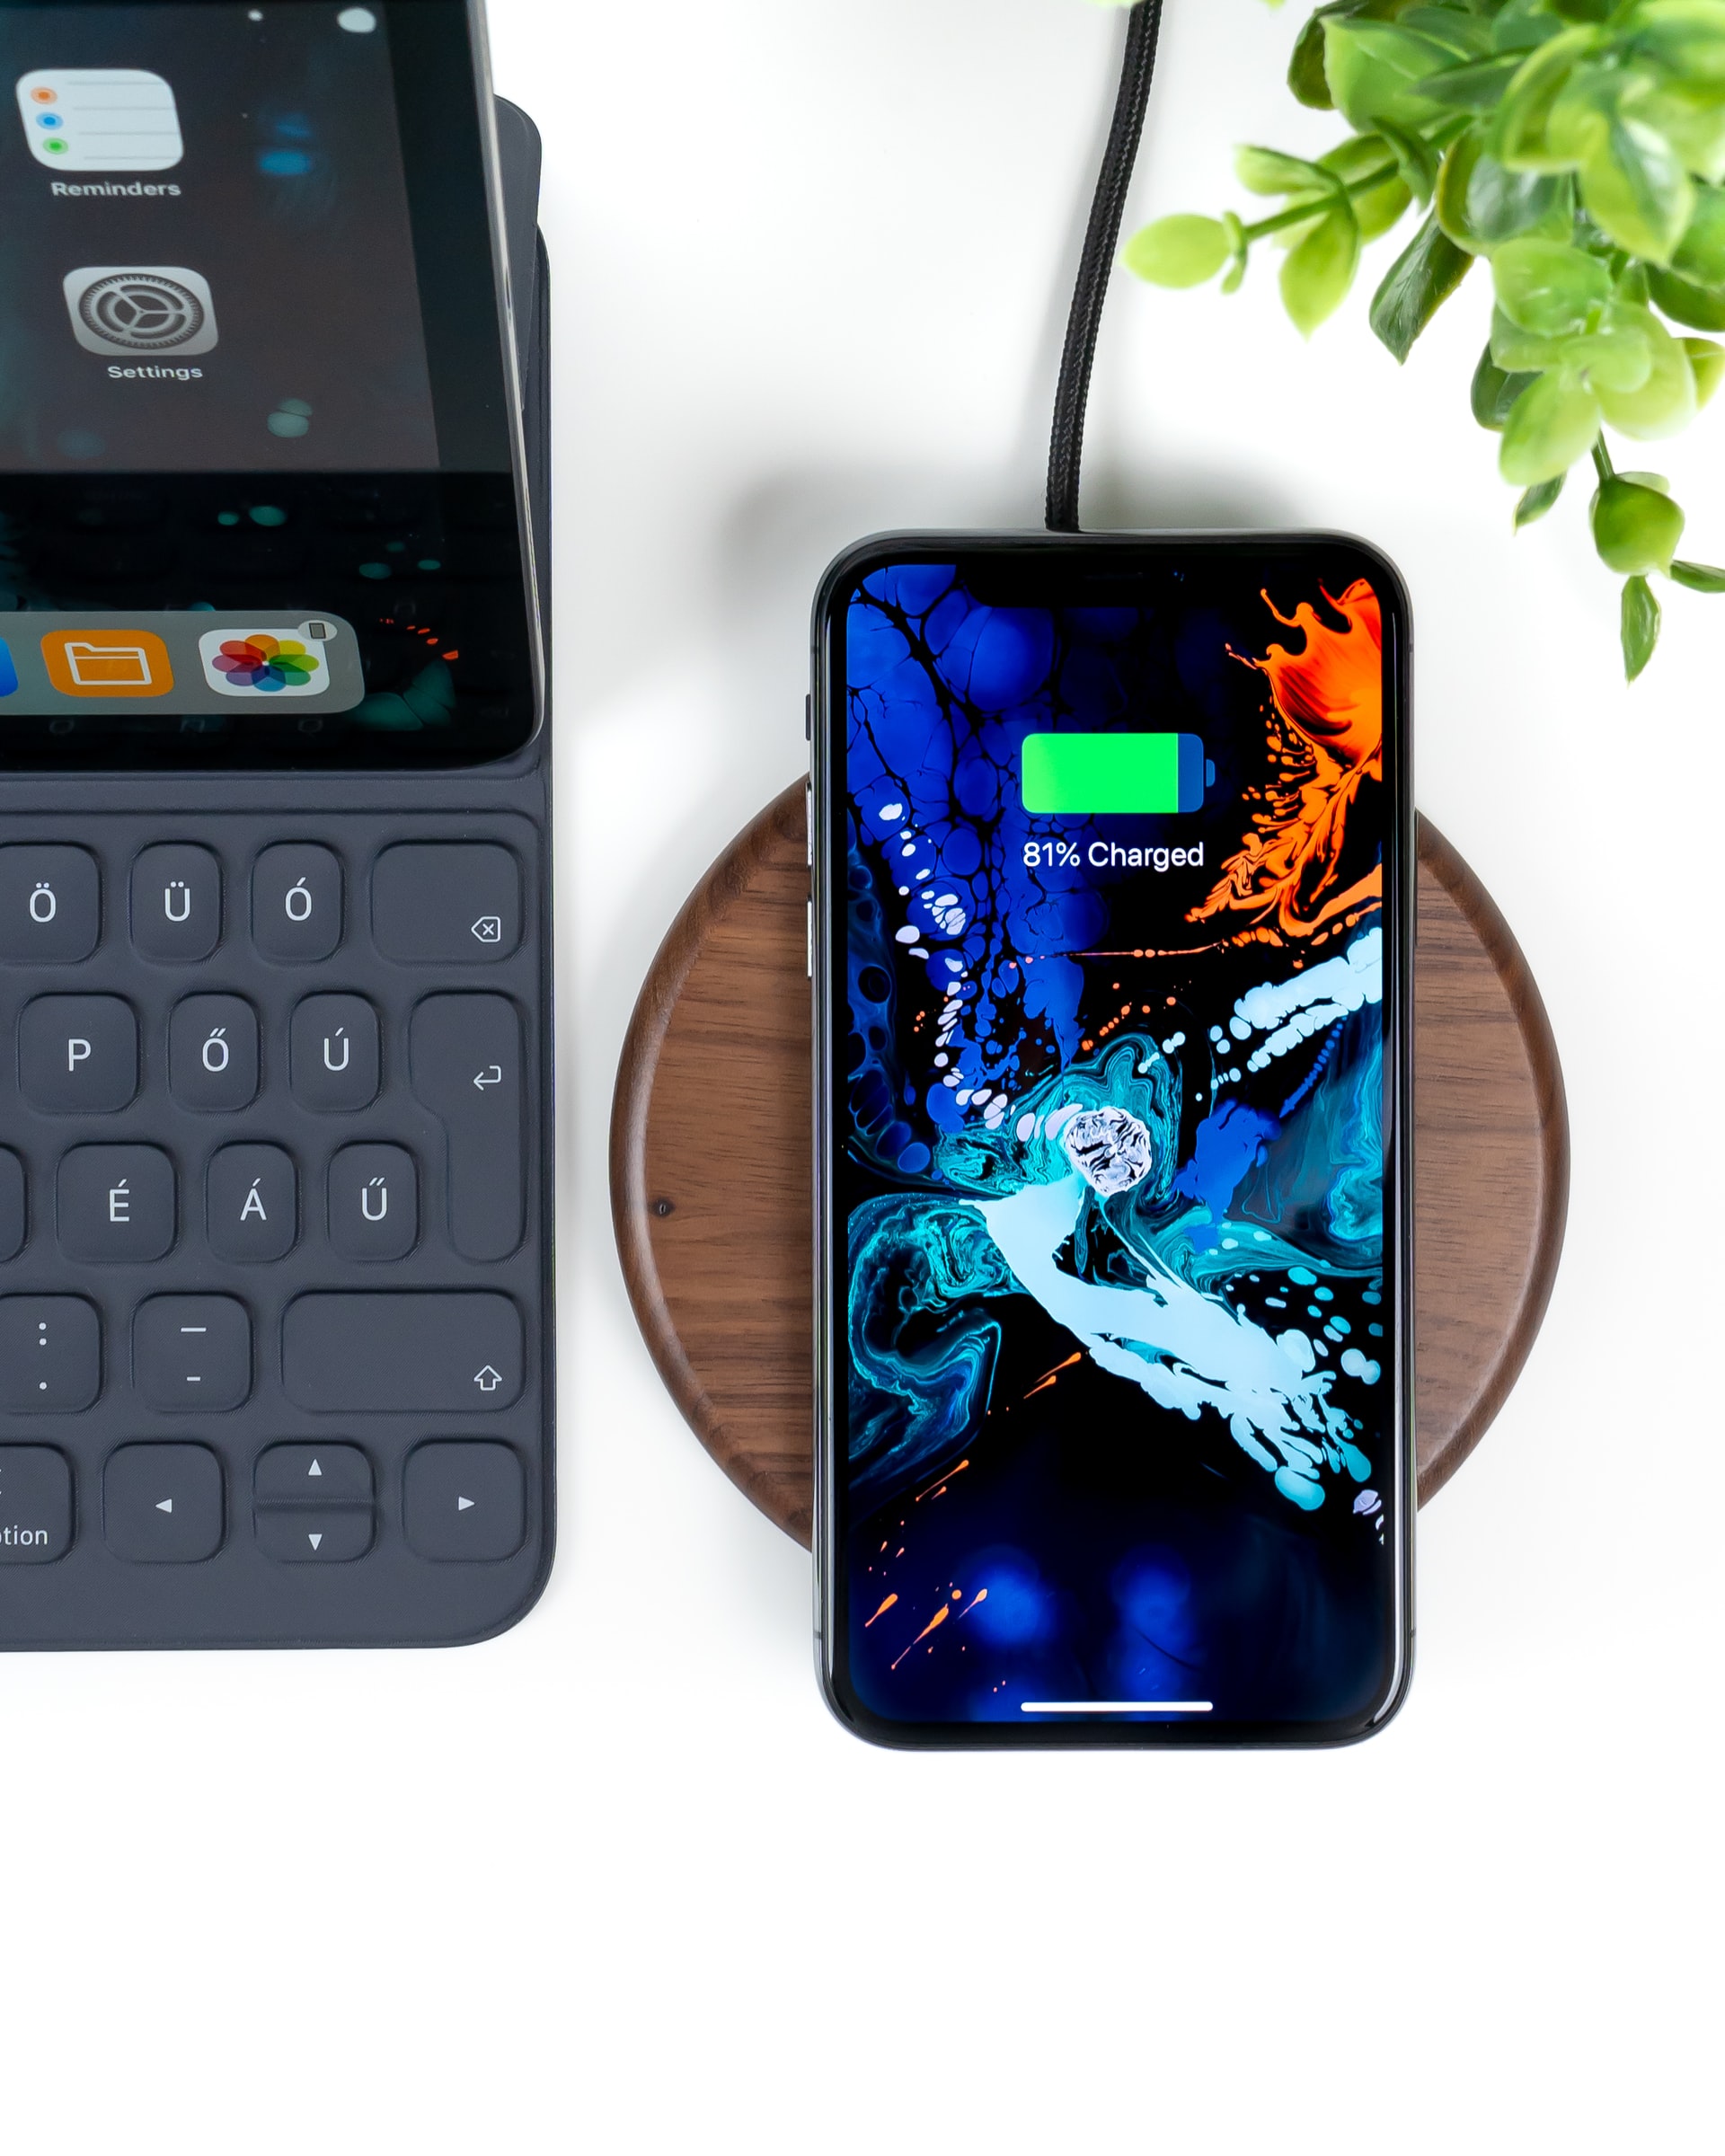 Phone sitting on a wireless charging pad